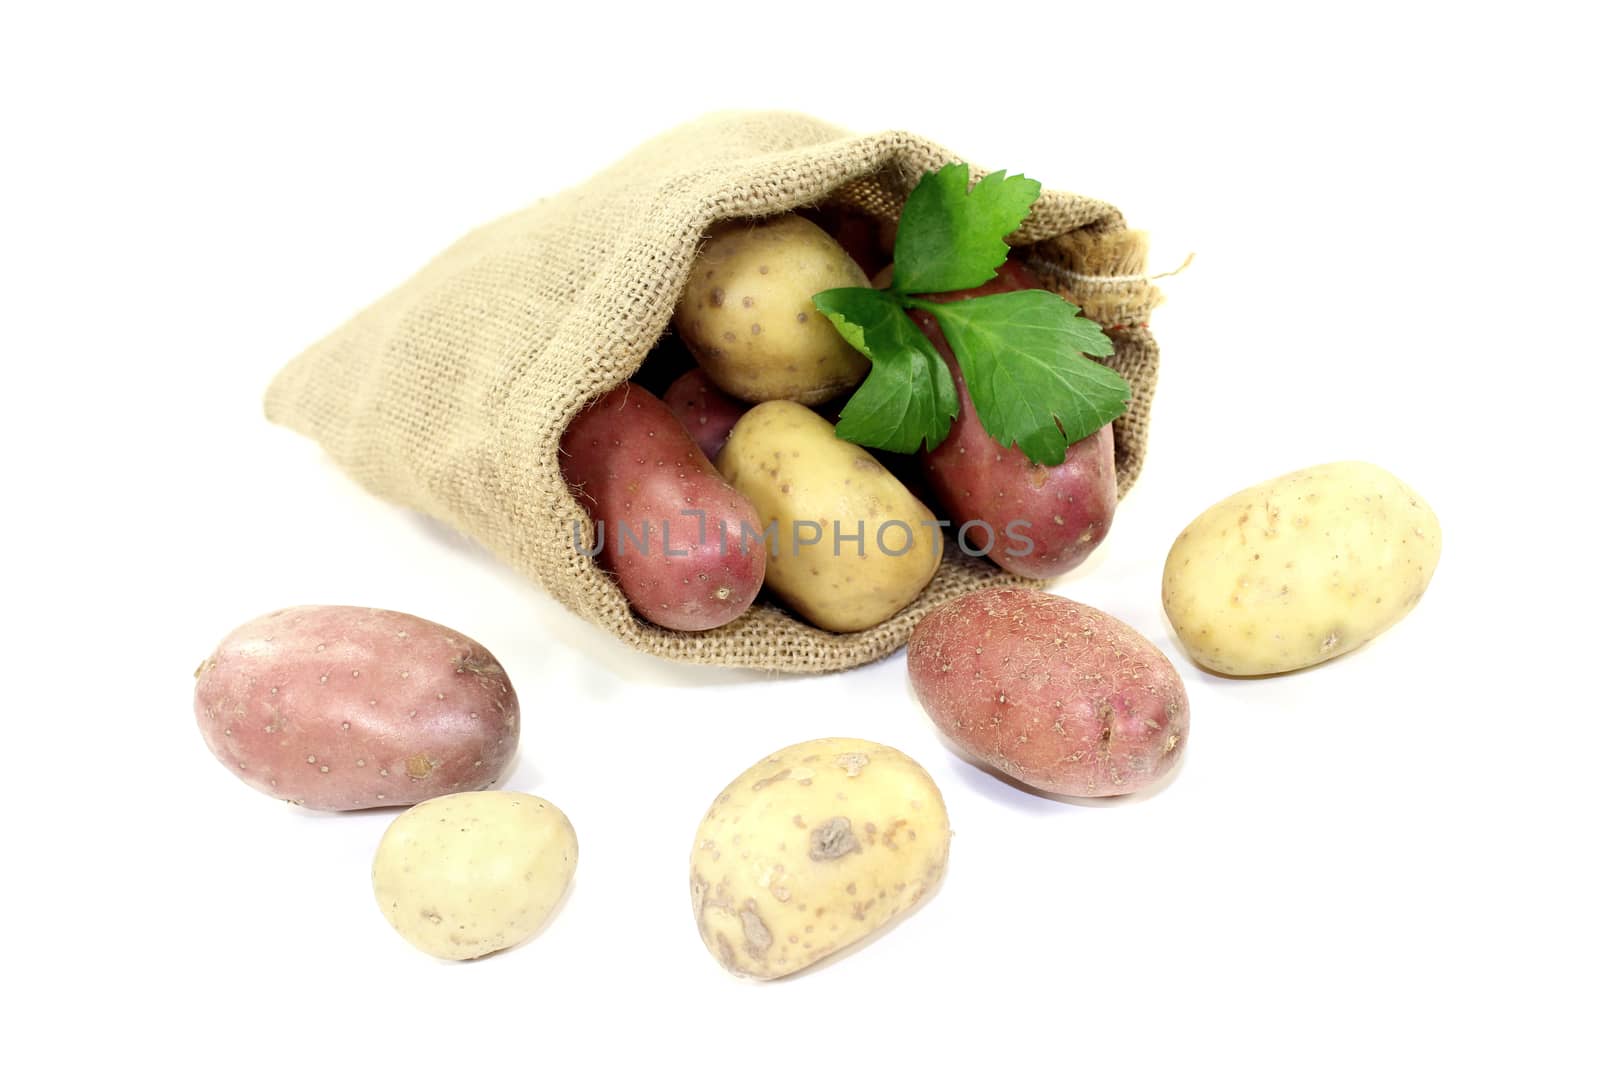 Potatoes in a sack by discovery